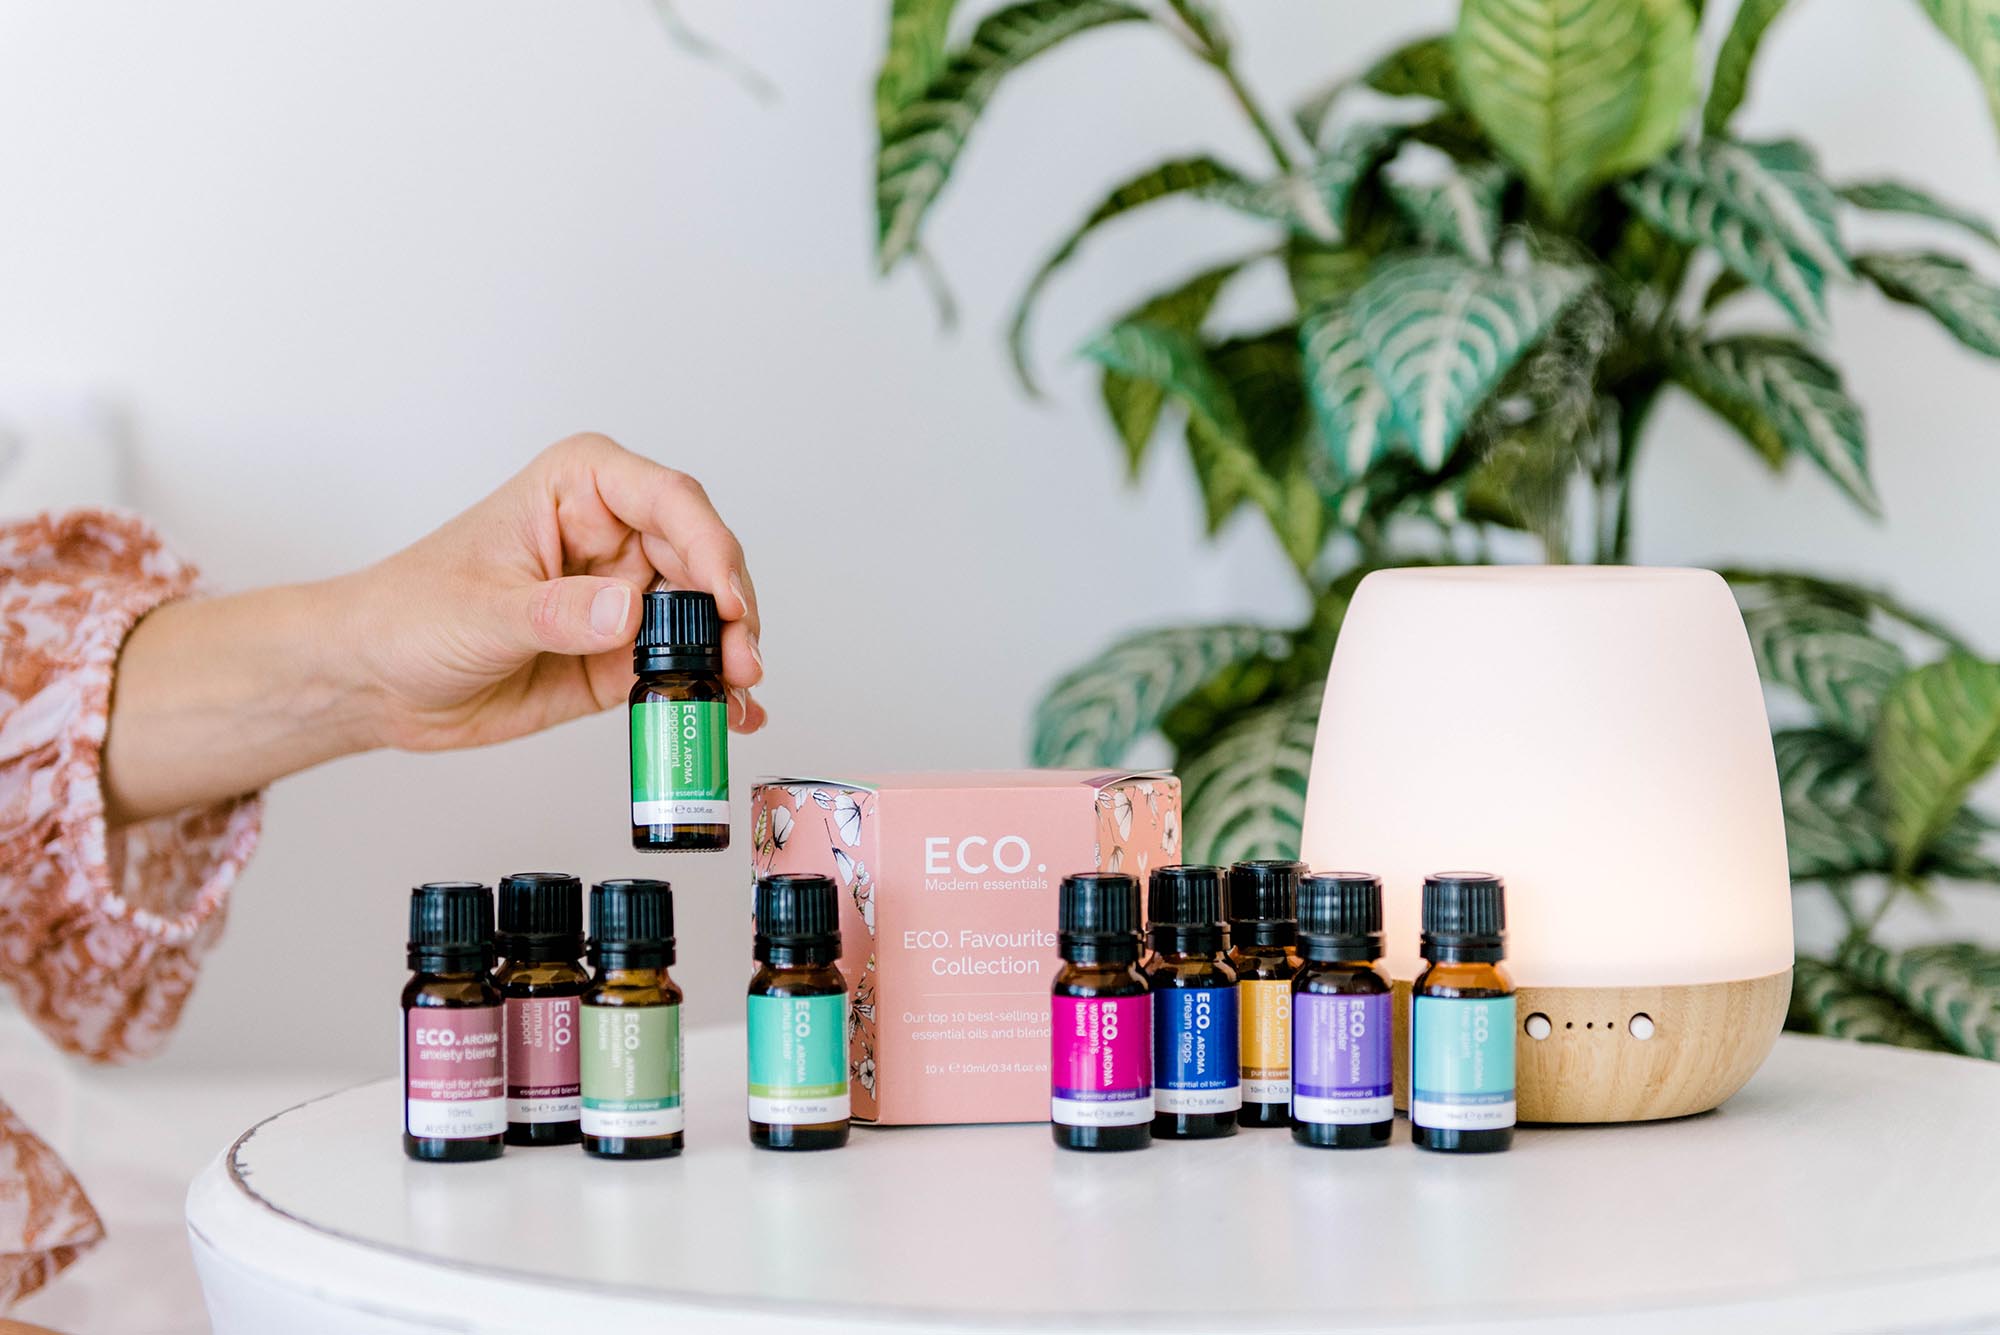 ECO. Modern Essentials Review - Discover Healthy Oil Blends for a Holistic Lifestyle